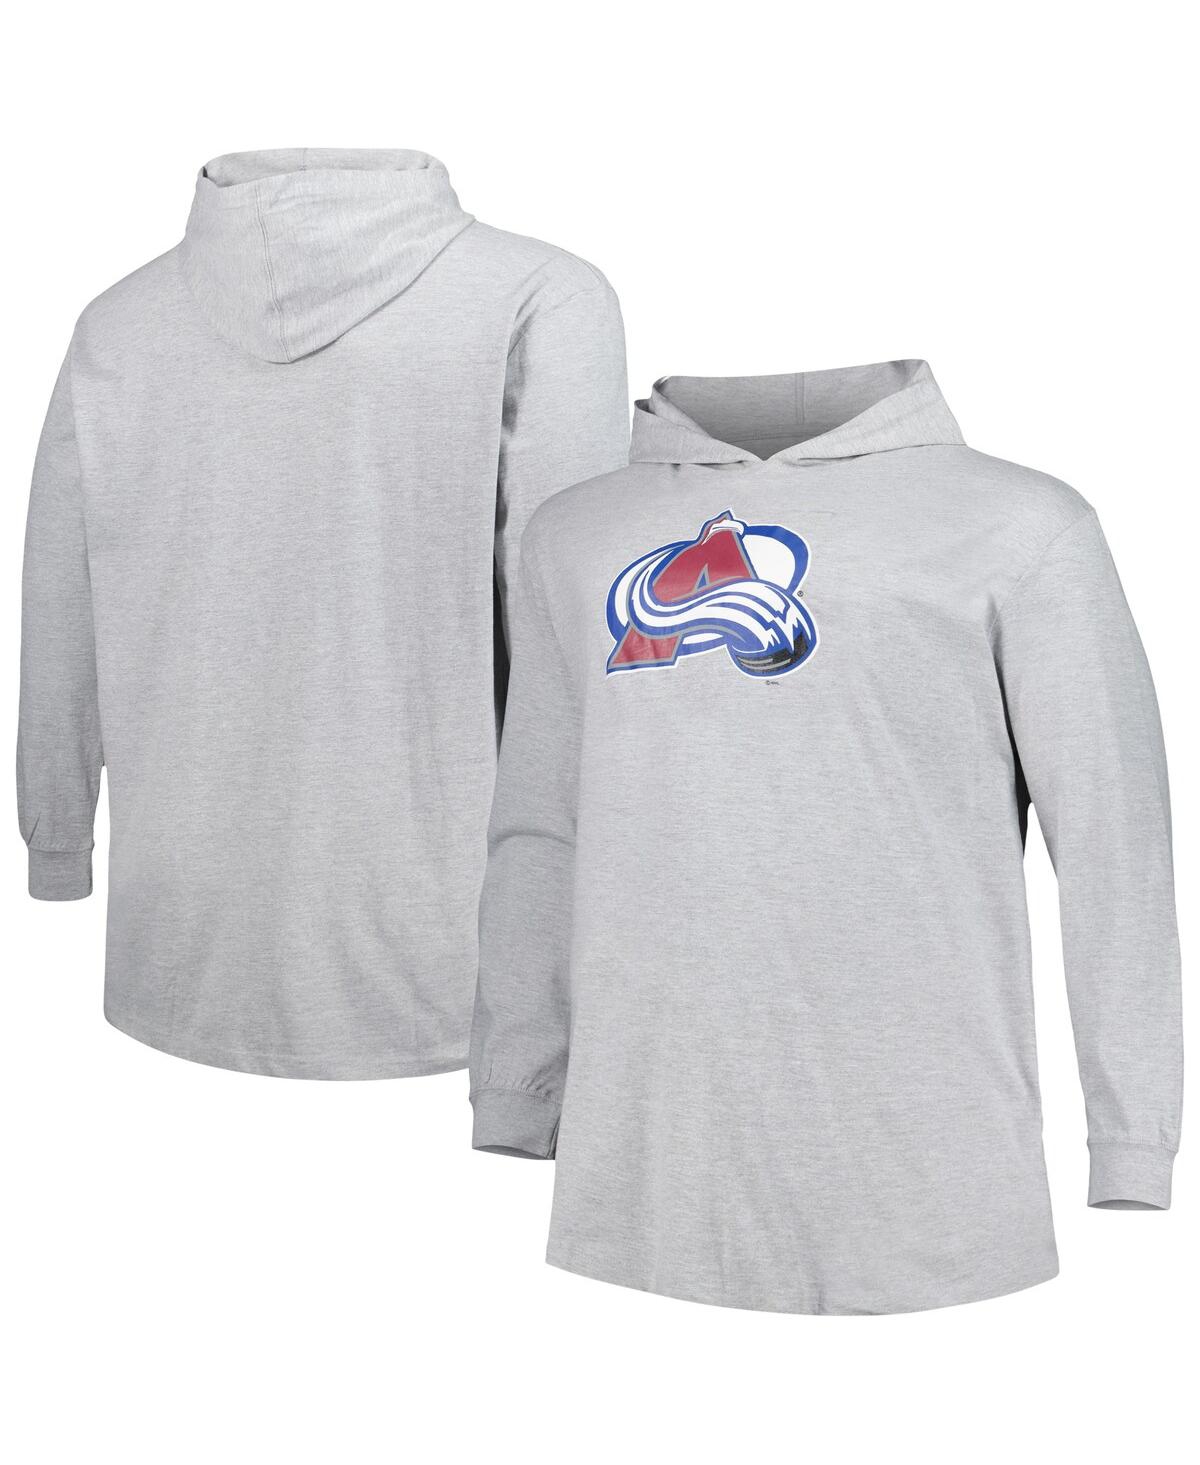 Men's Heather Gray Colorado Avalanche Big and Tall Pullover Hoodie - Heather Gray